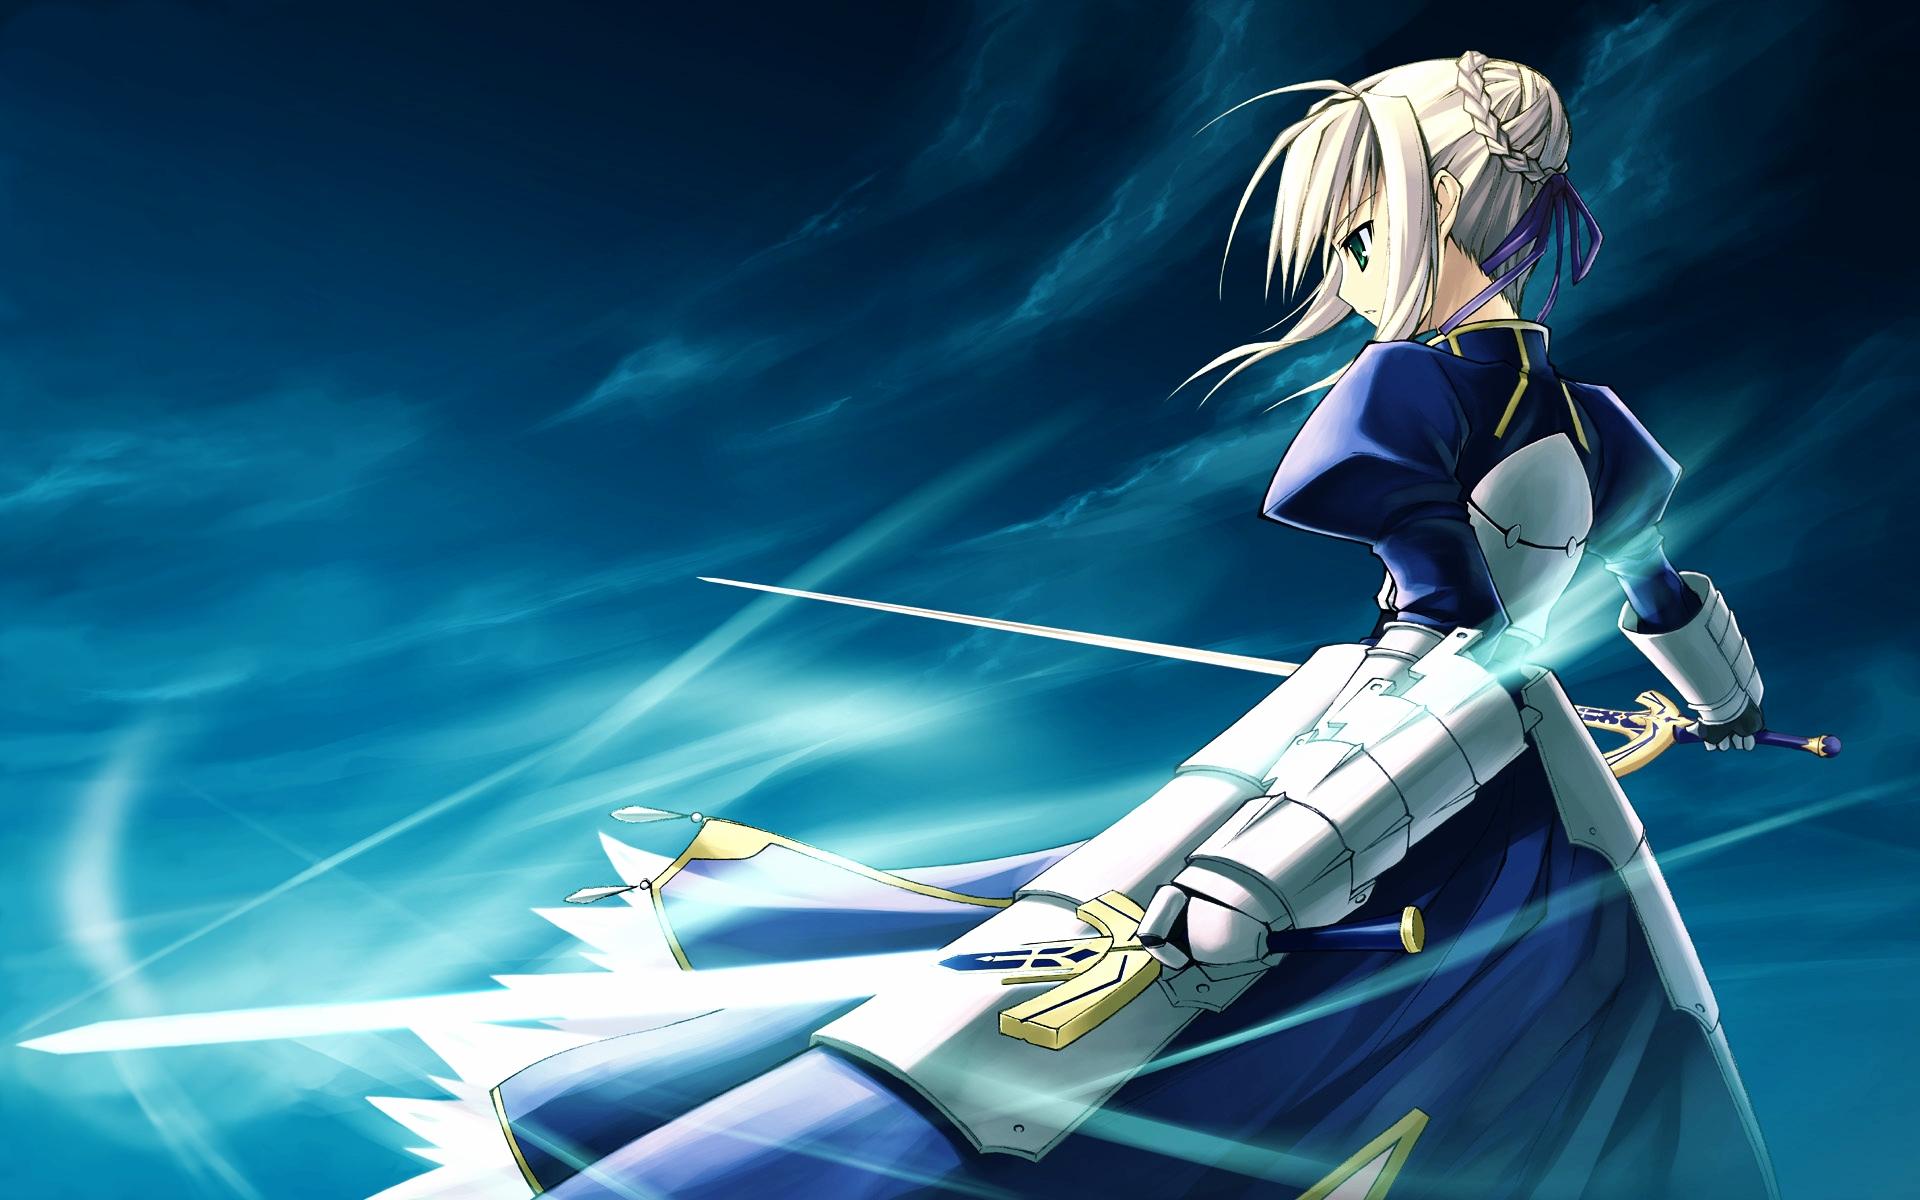 9. "Saber" from Fate/stay night - wide 5